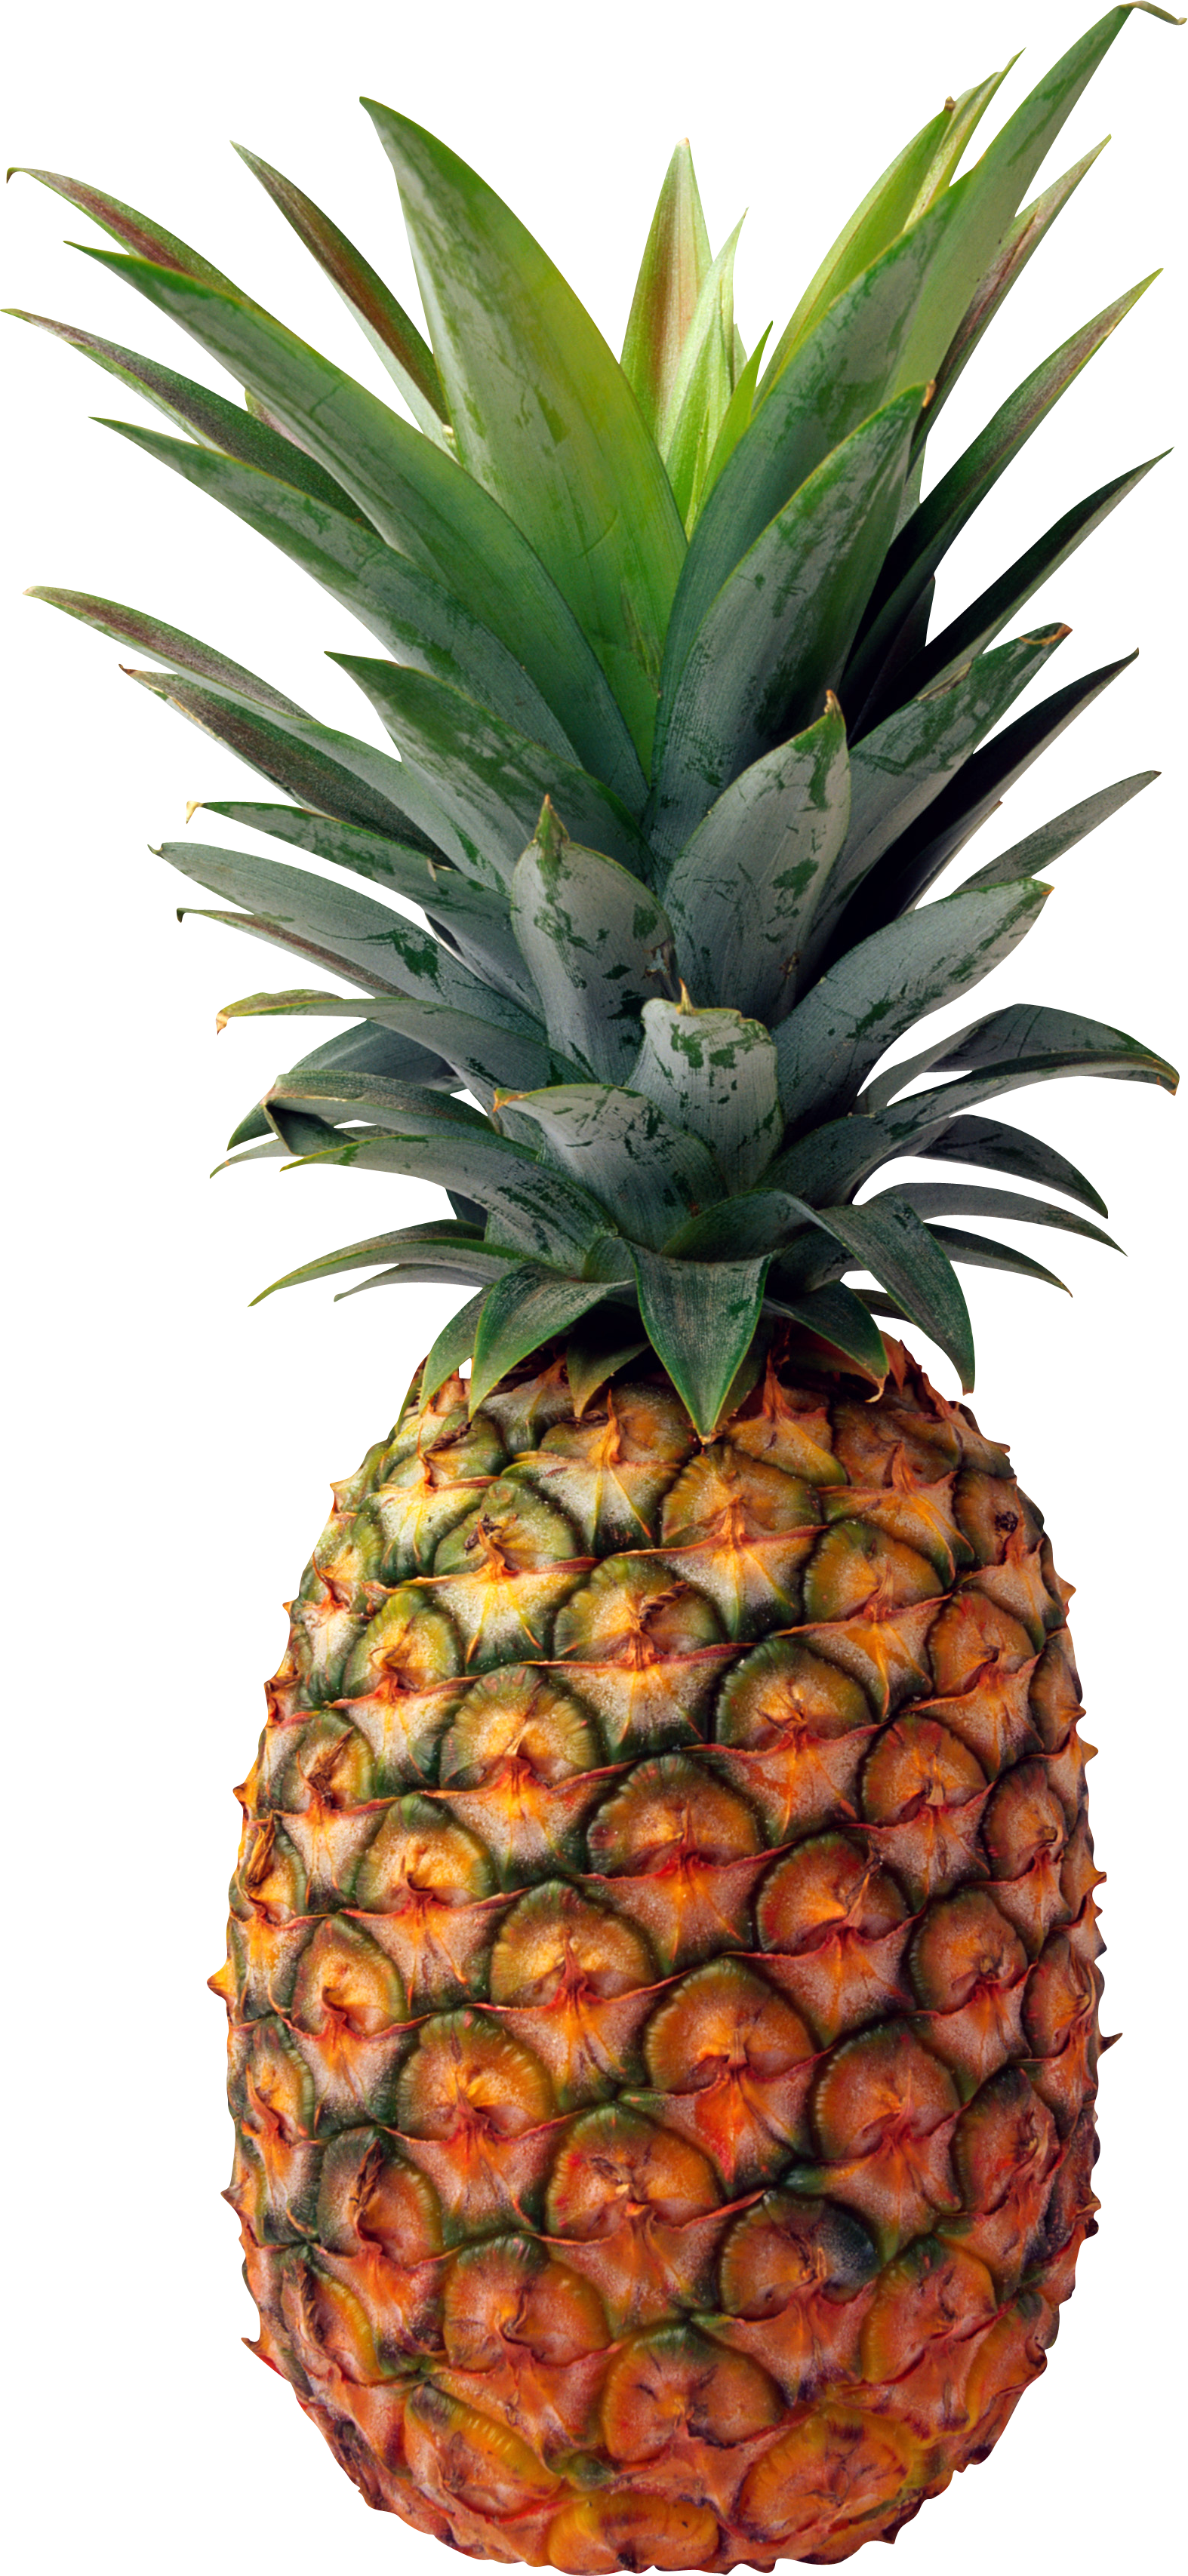 HQ Pineapple Wallpapers | File 6170.75Kb